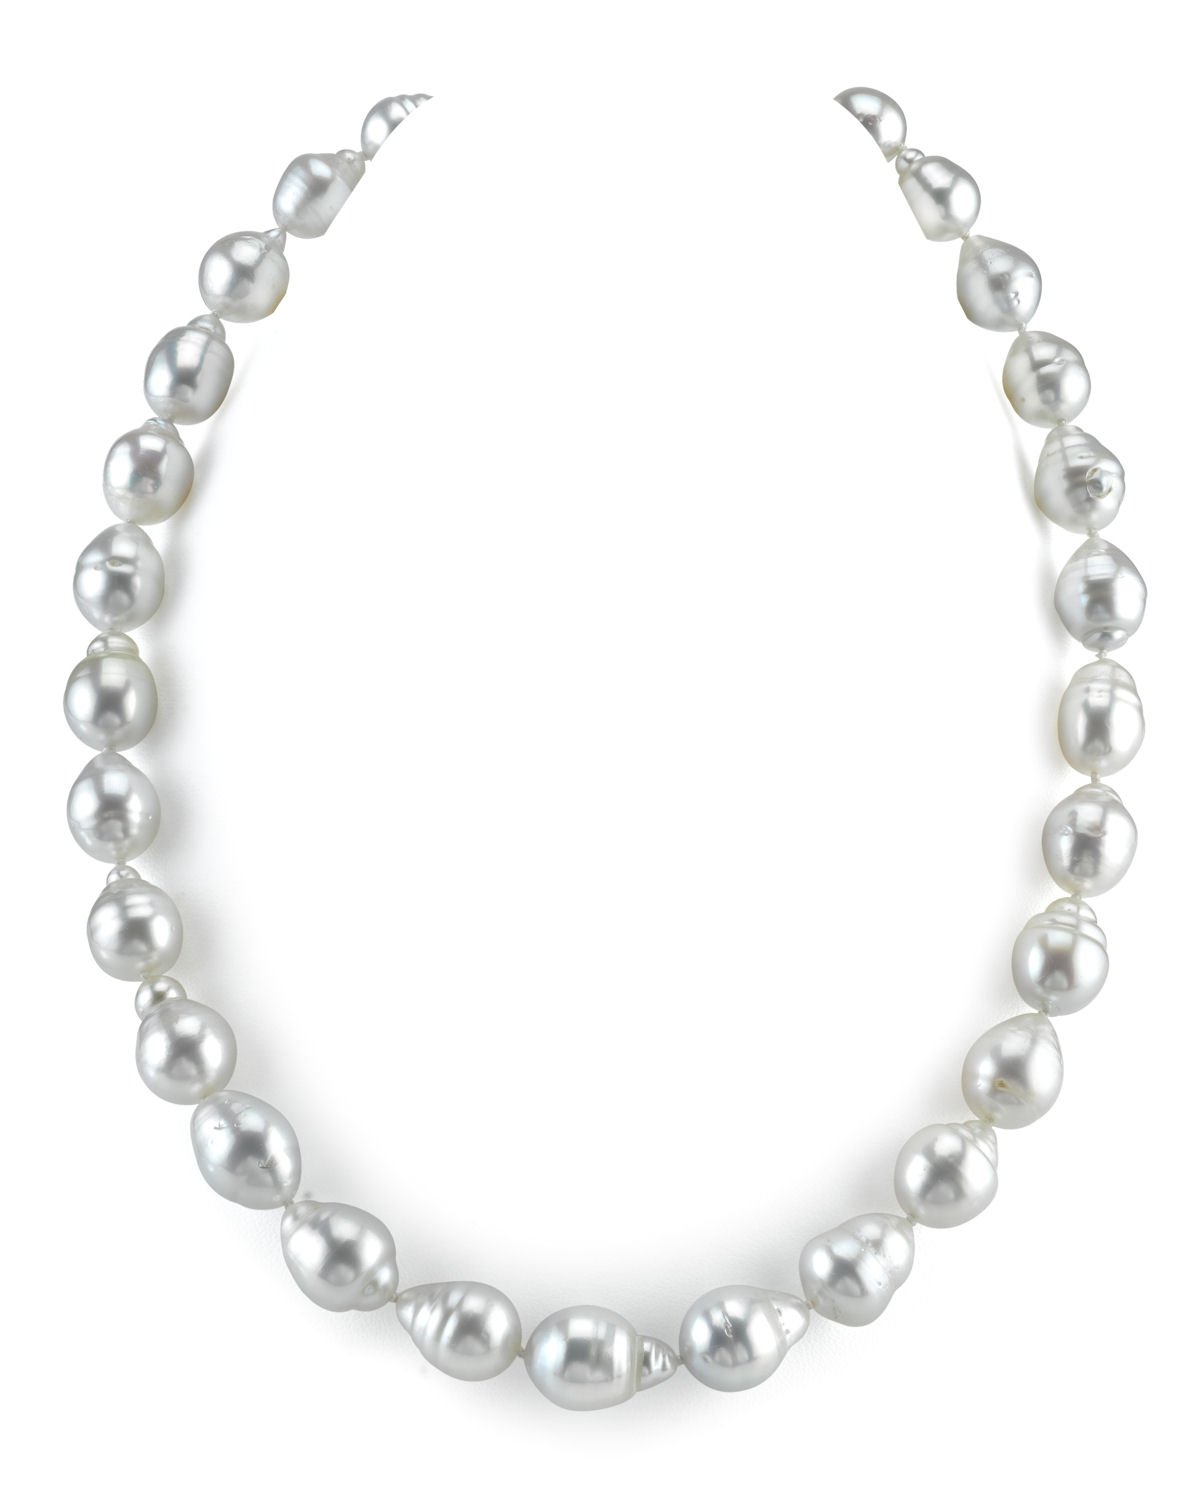 9-11mm White South Sea Baroque Pearl Necklace